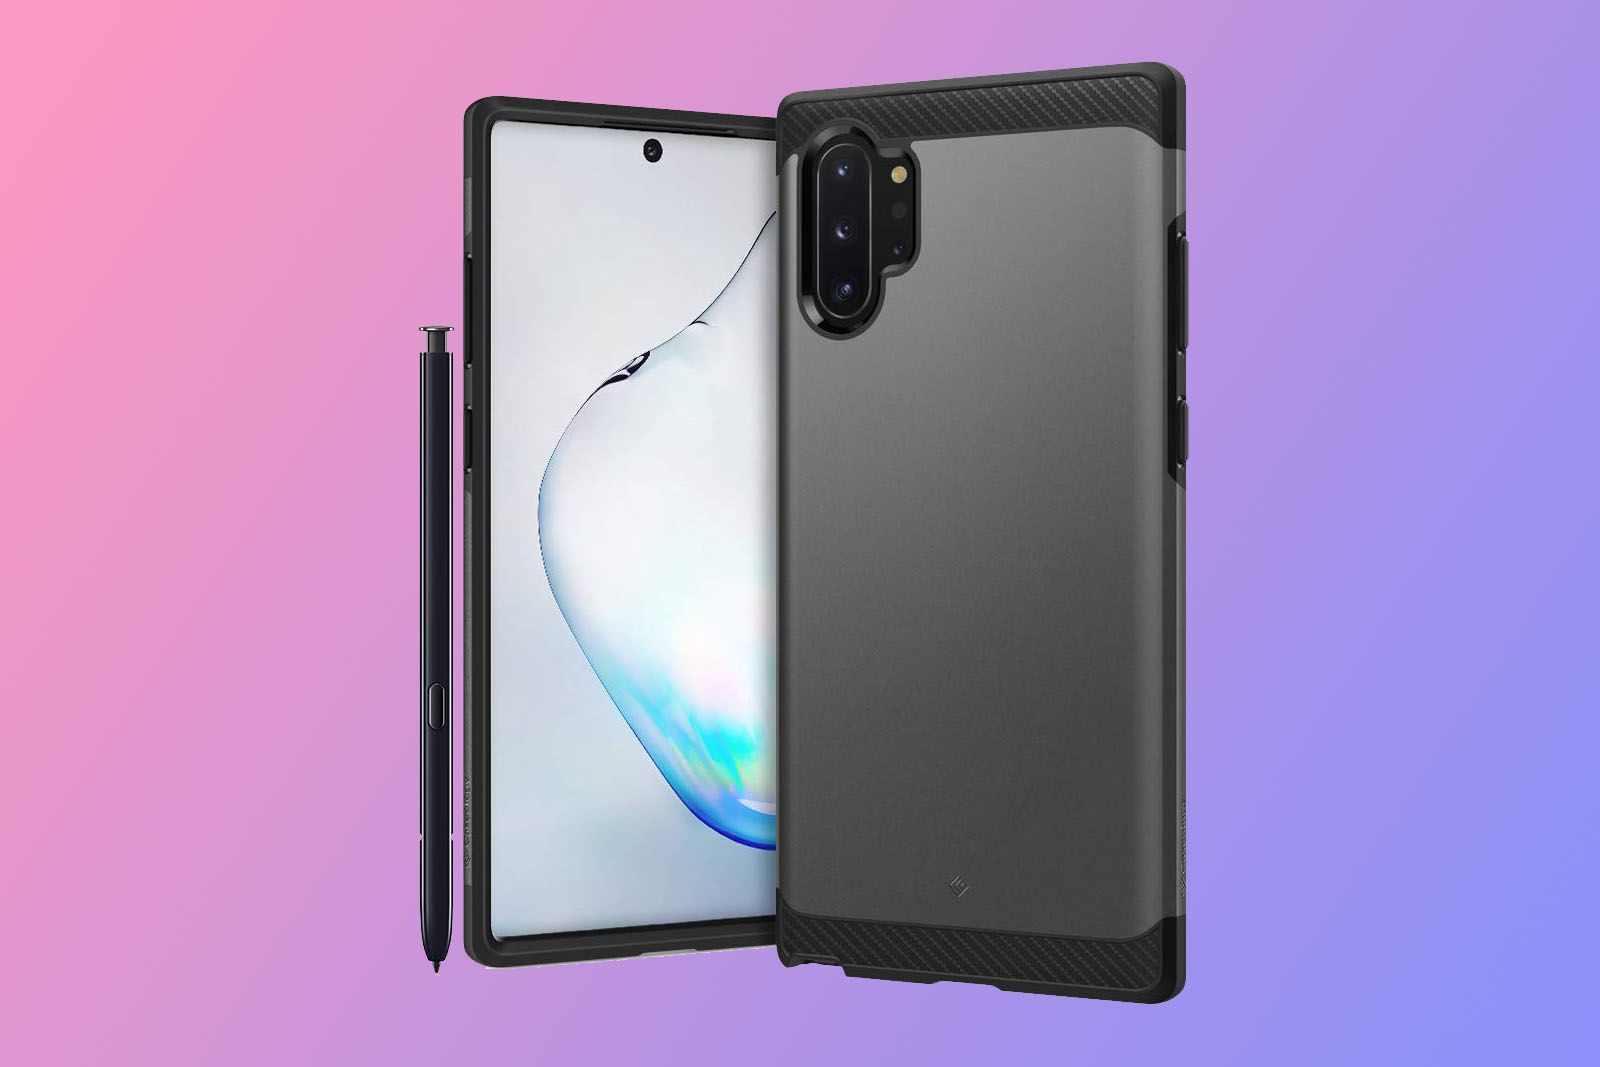 Best Note 10 And Note 10 Cases Protect Your New Samsung Phone image 10